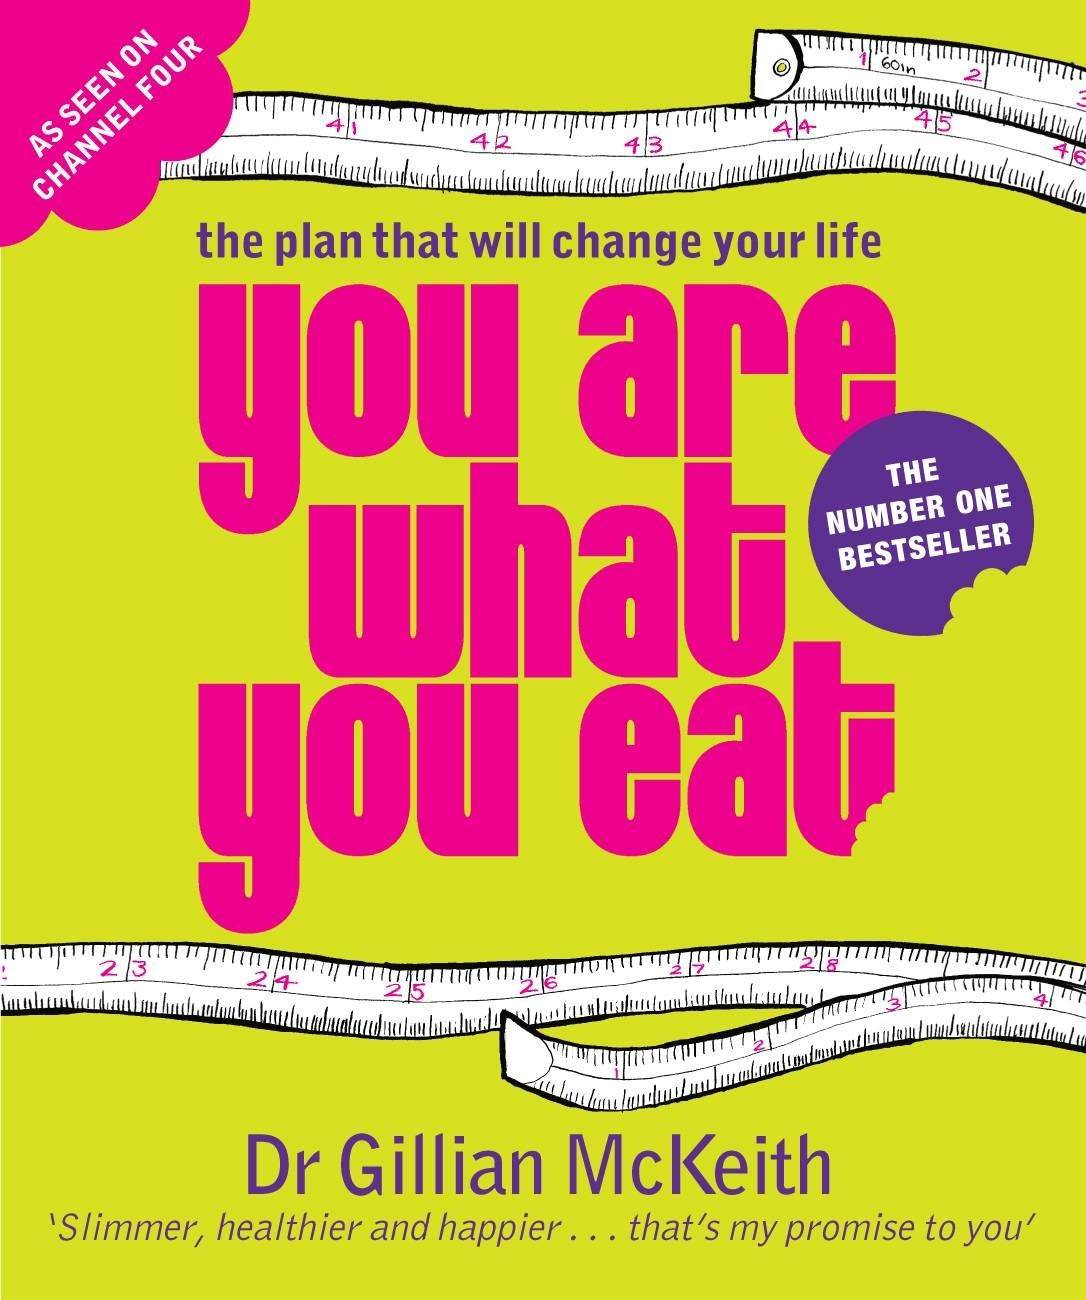 You are what you eat by Dr. Gillian McKeith